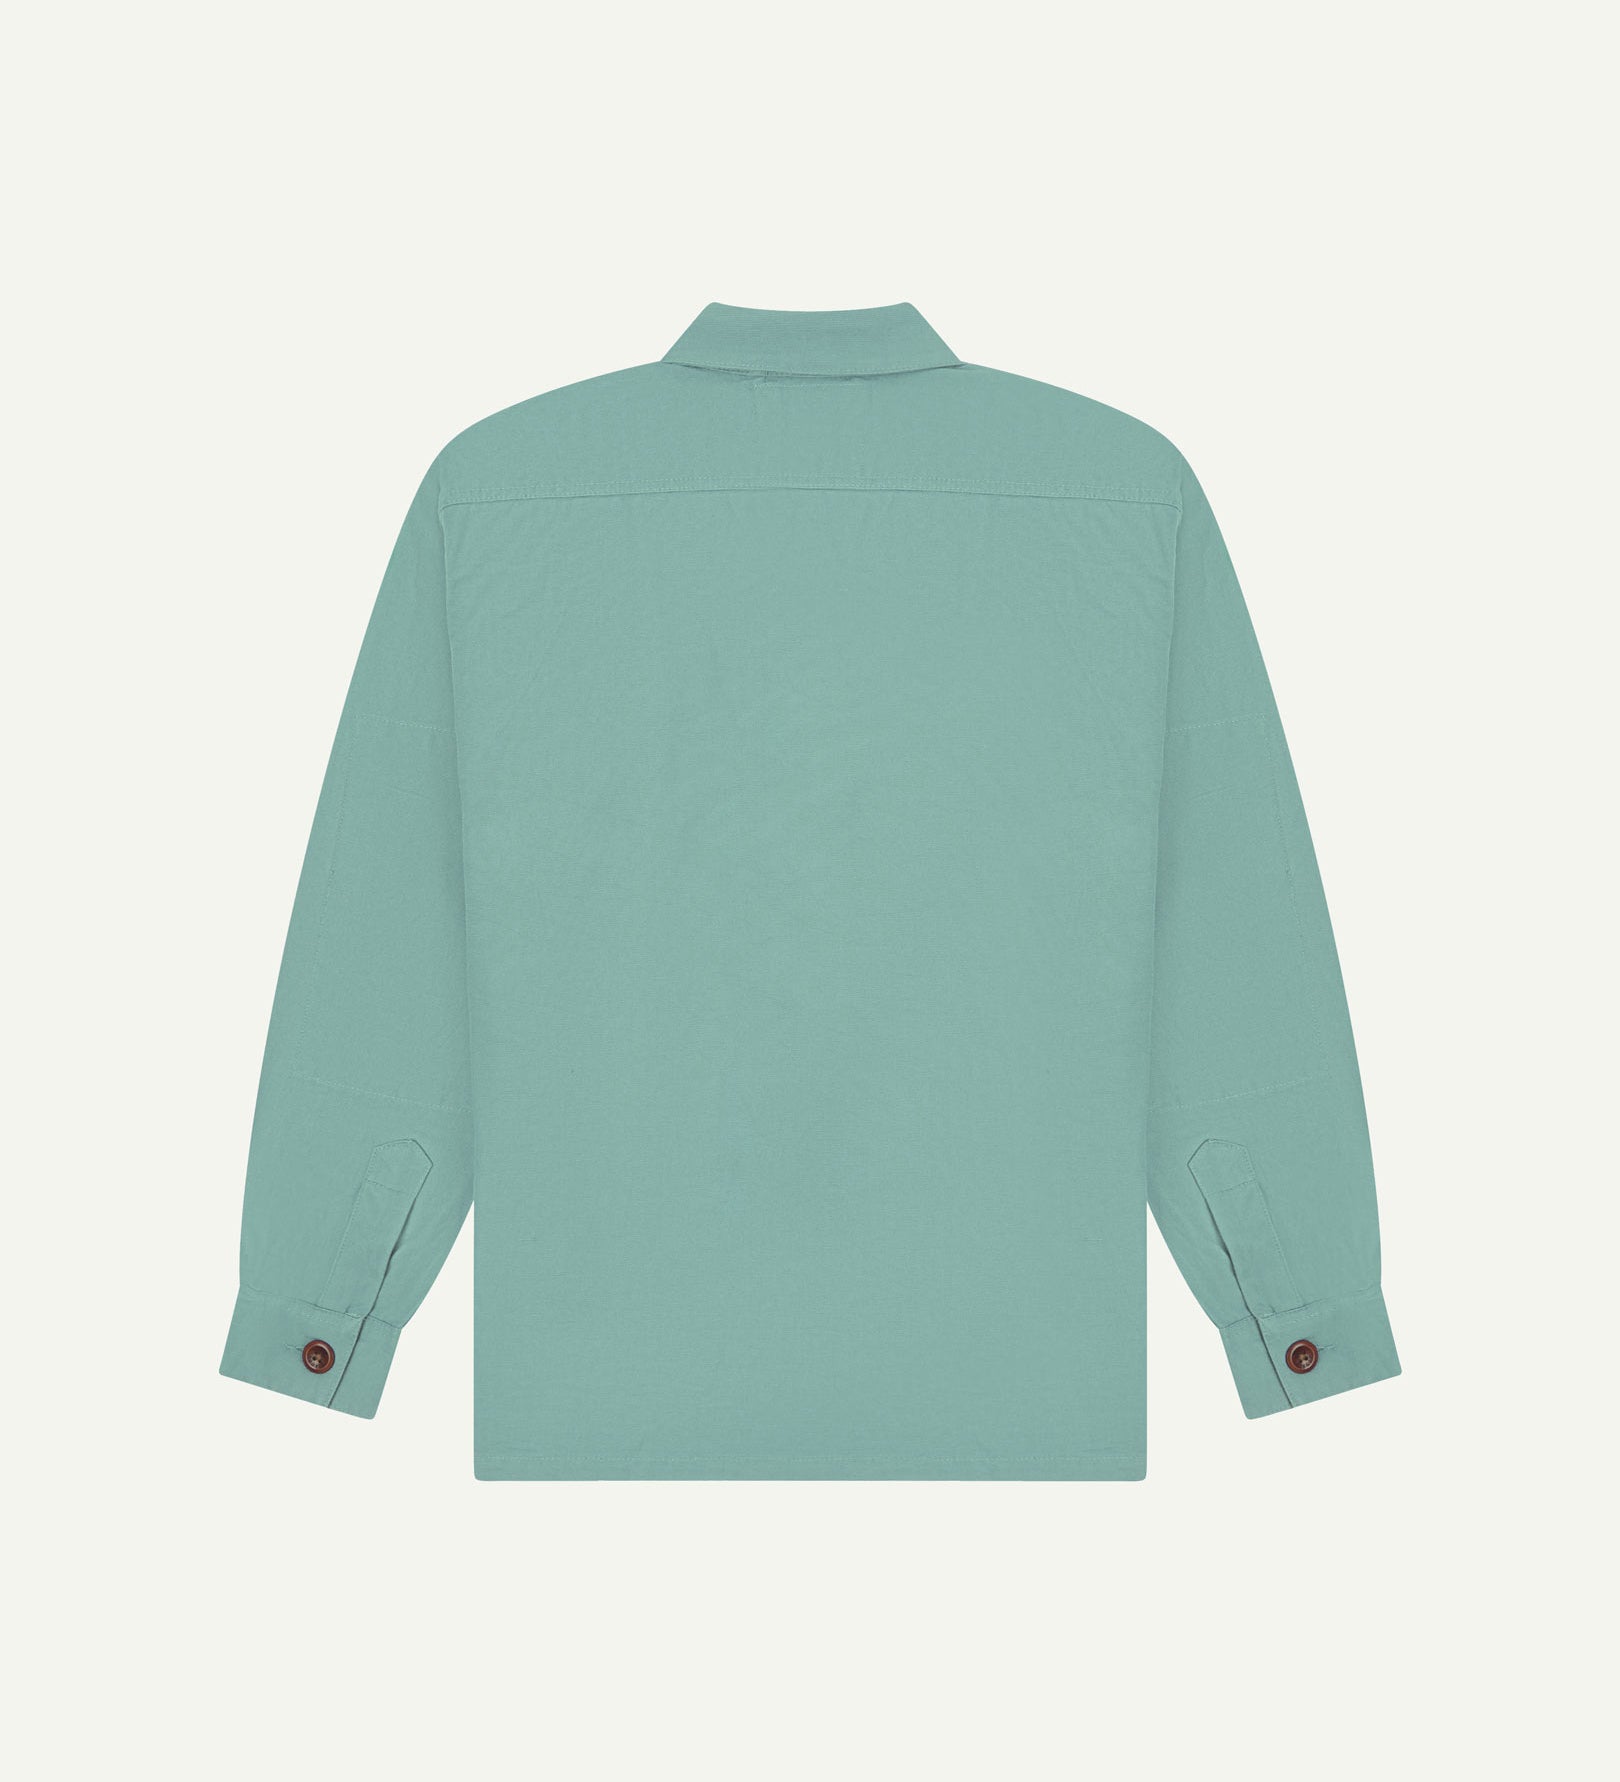 Reverse of eucalyptus (mint-green) buttoned organic cotton workshirt from Uskees showing reinforced elbows, tailored cuffs and boxy silhouette.